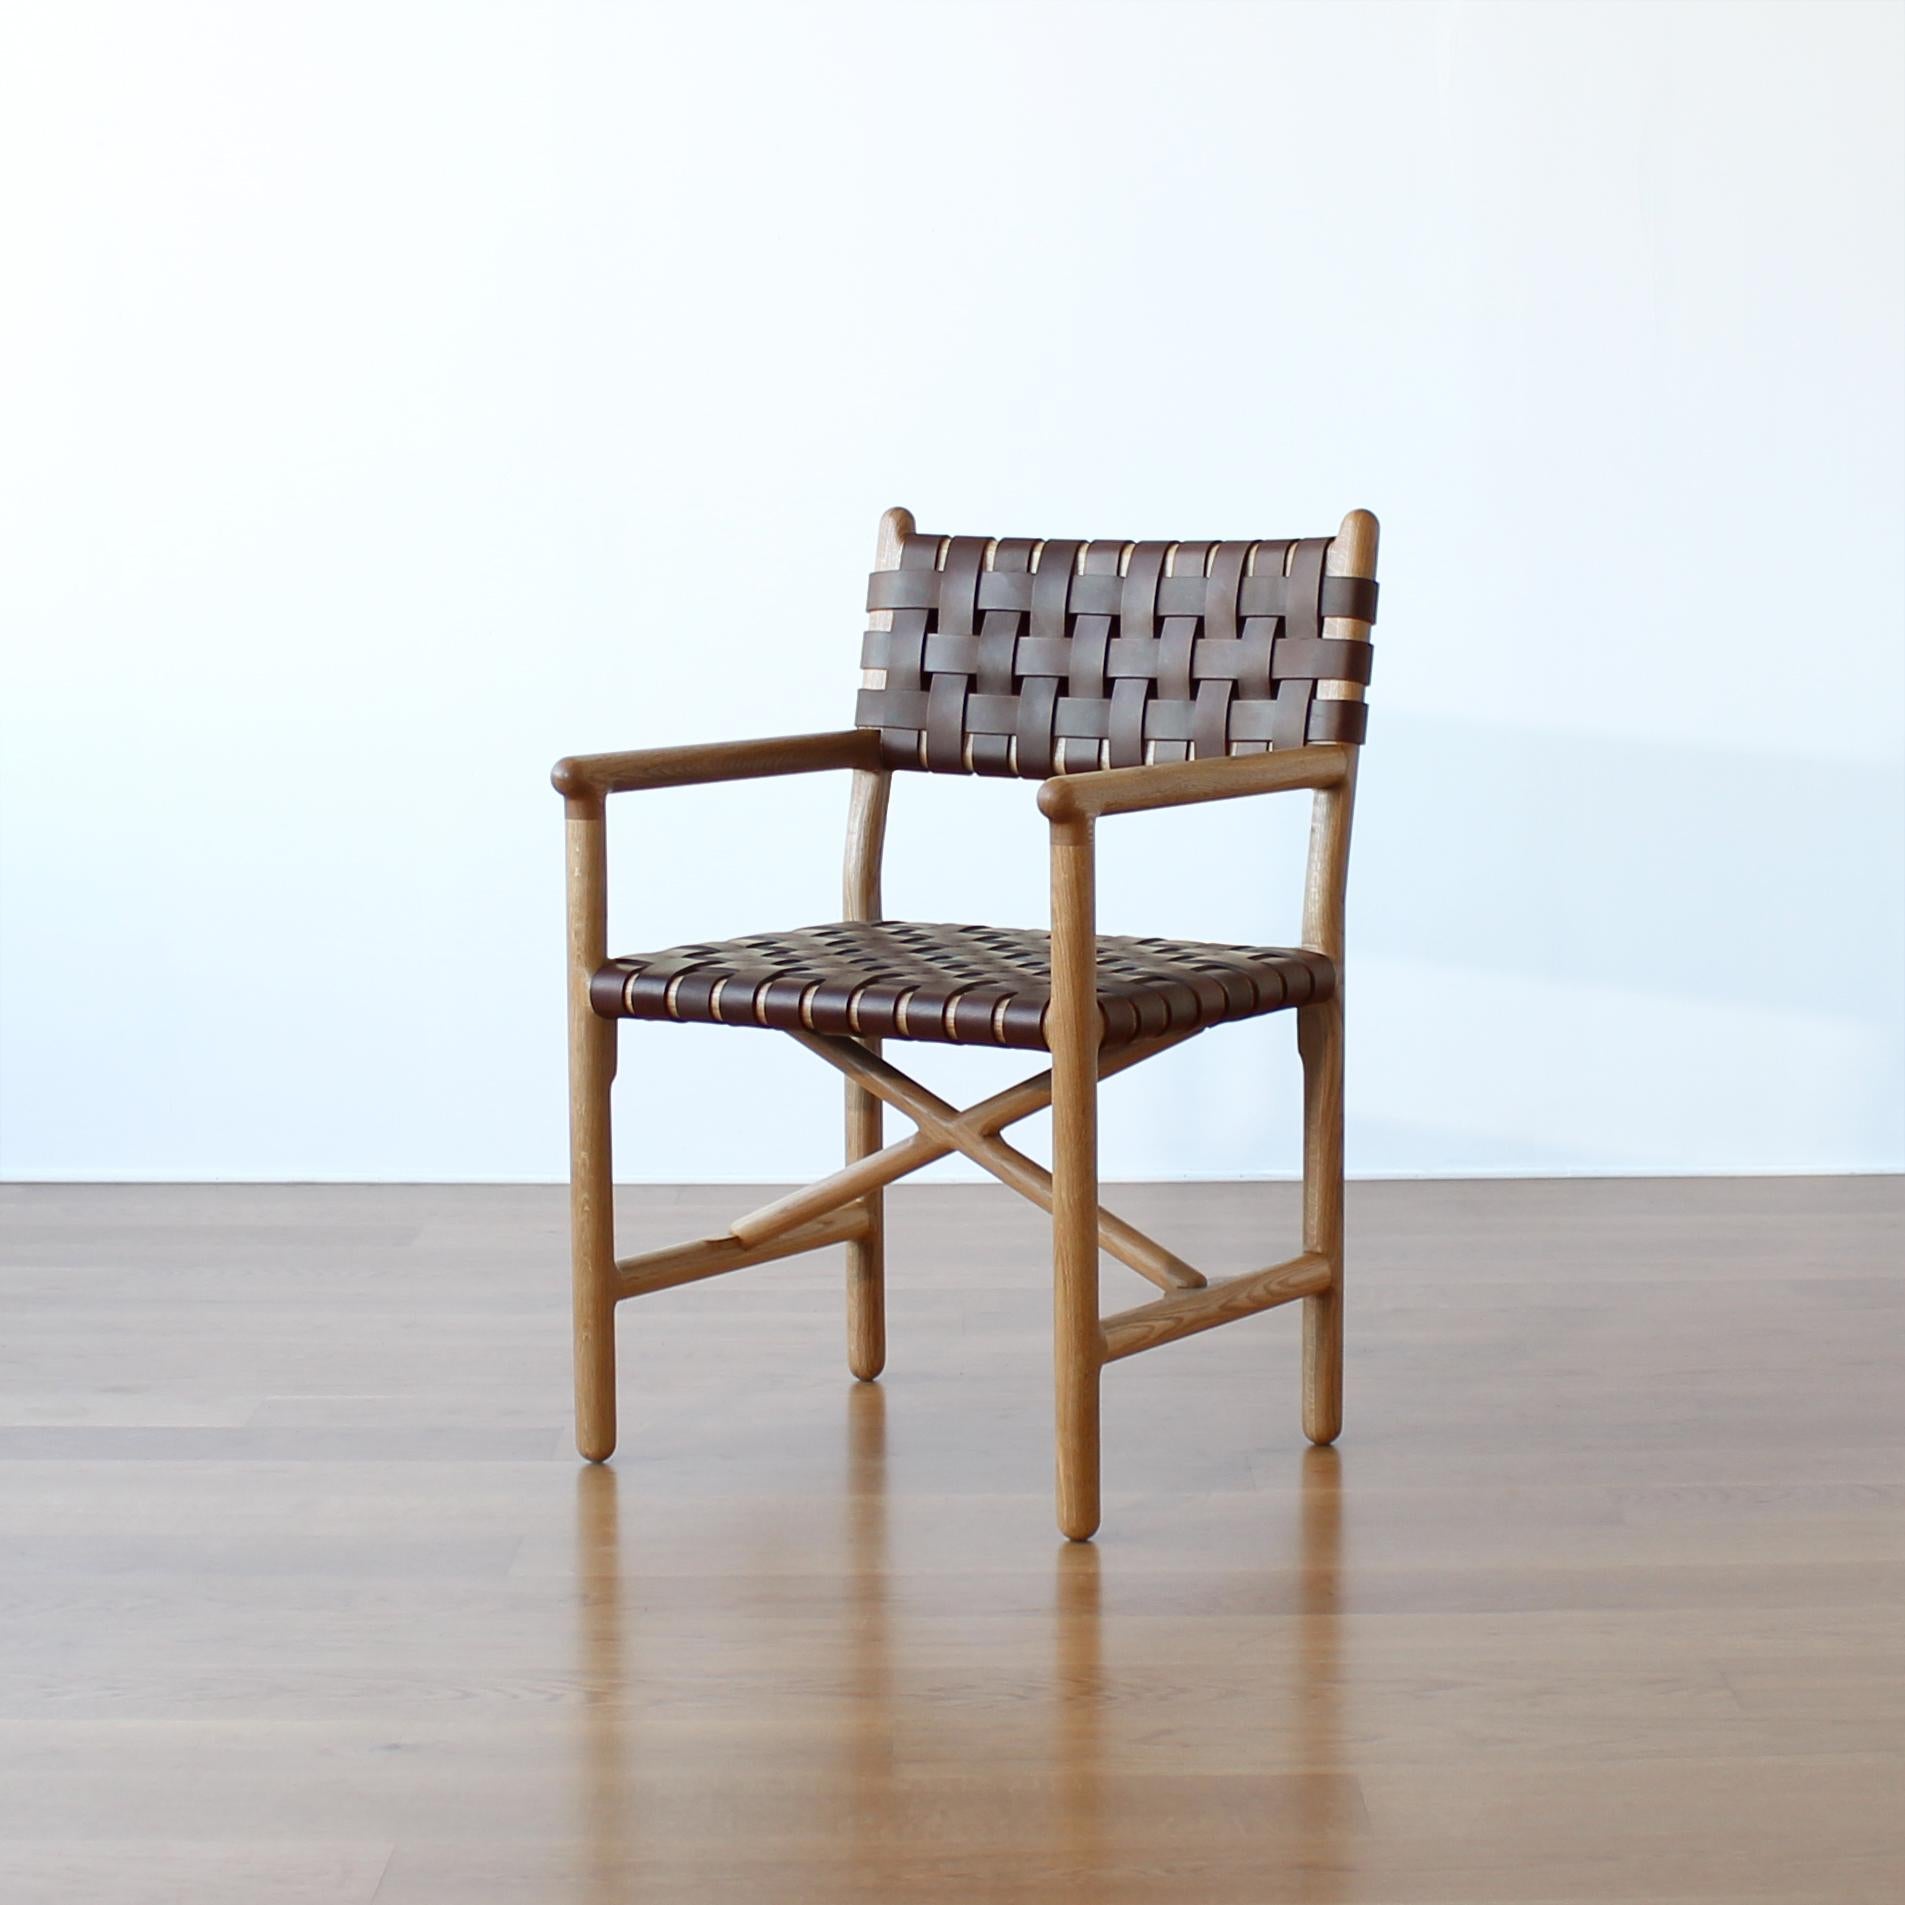 Montgomery arm chair by Crump and Kwash 

Hand shaped white oak frame / commercial finish / handwoven hickory brown leather seat and back / nylon glides

Also available with black leather, and without arms.

